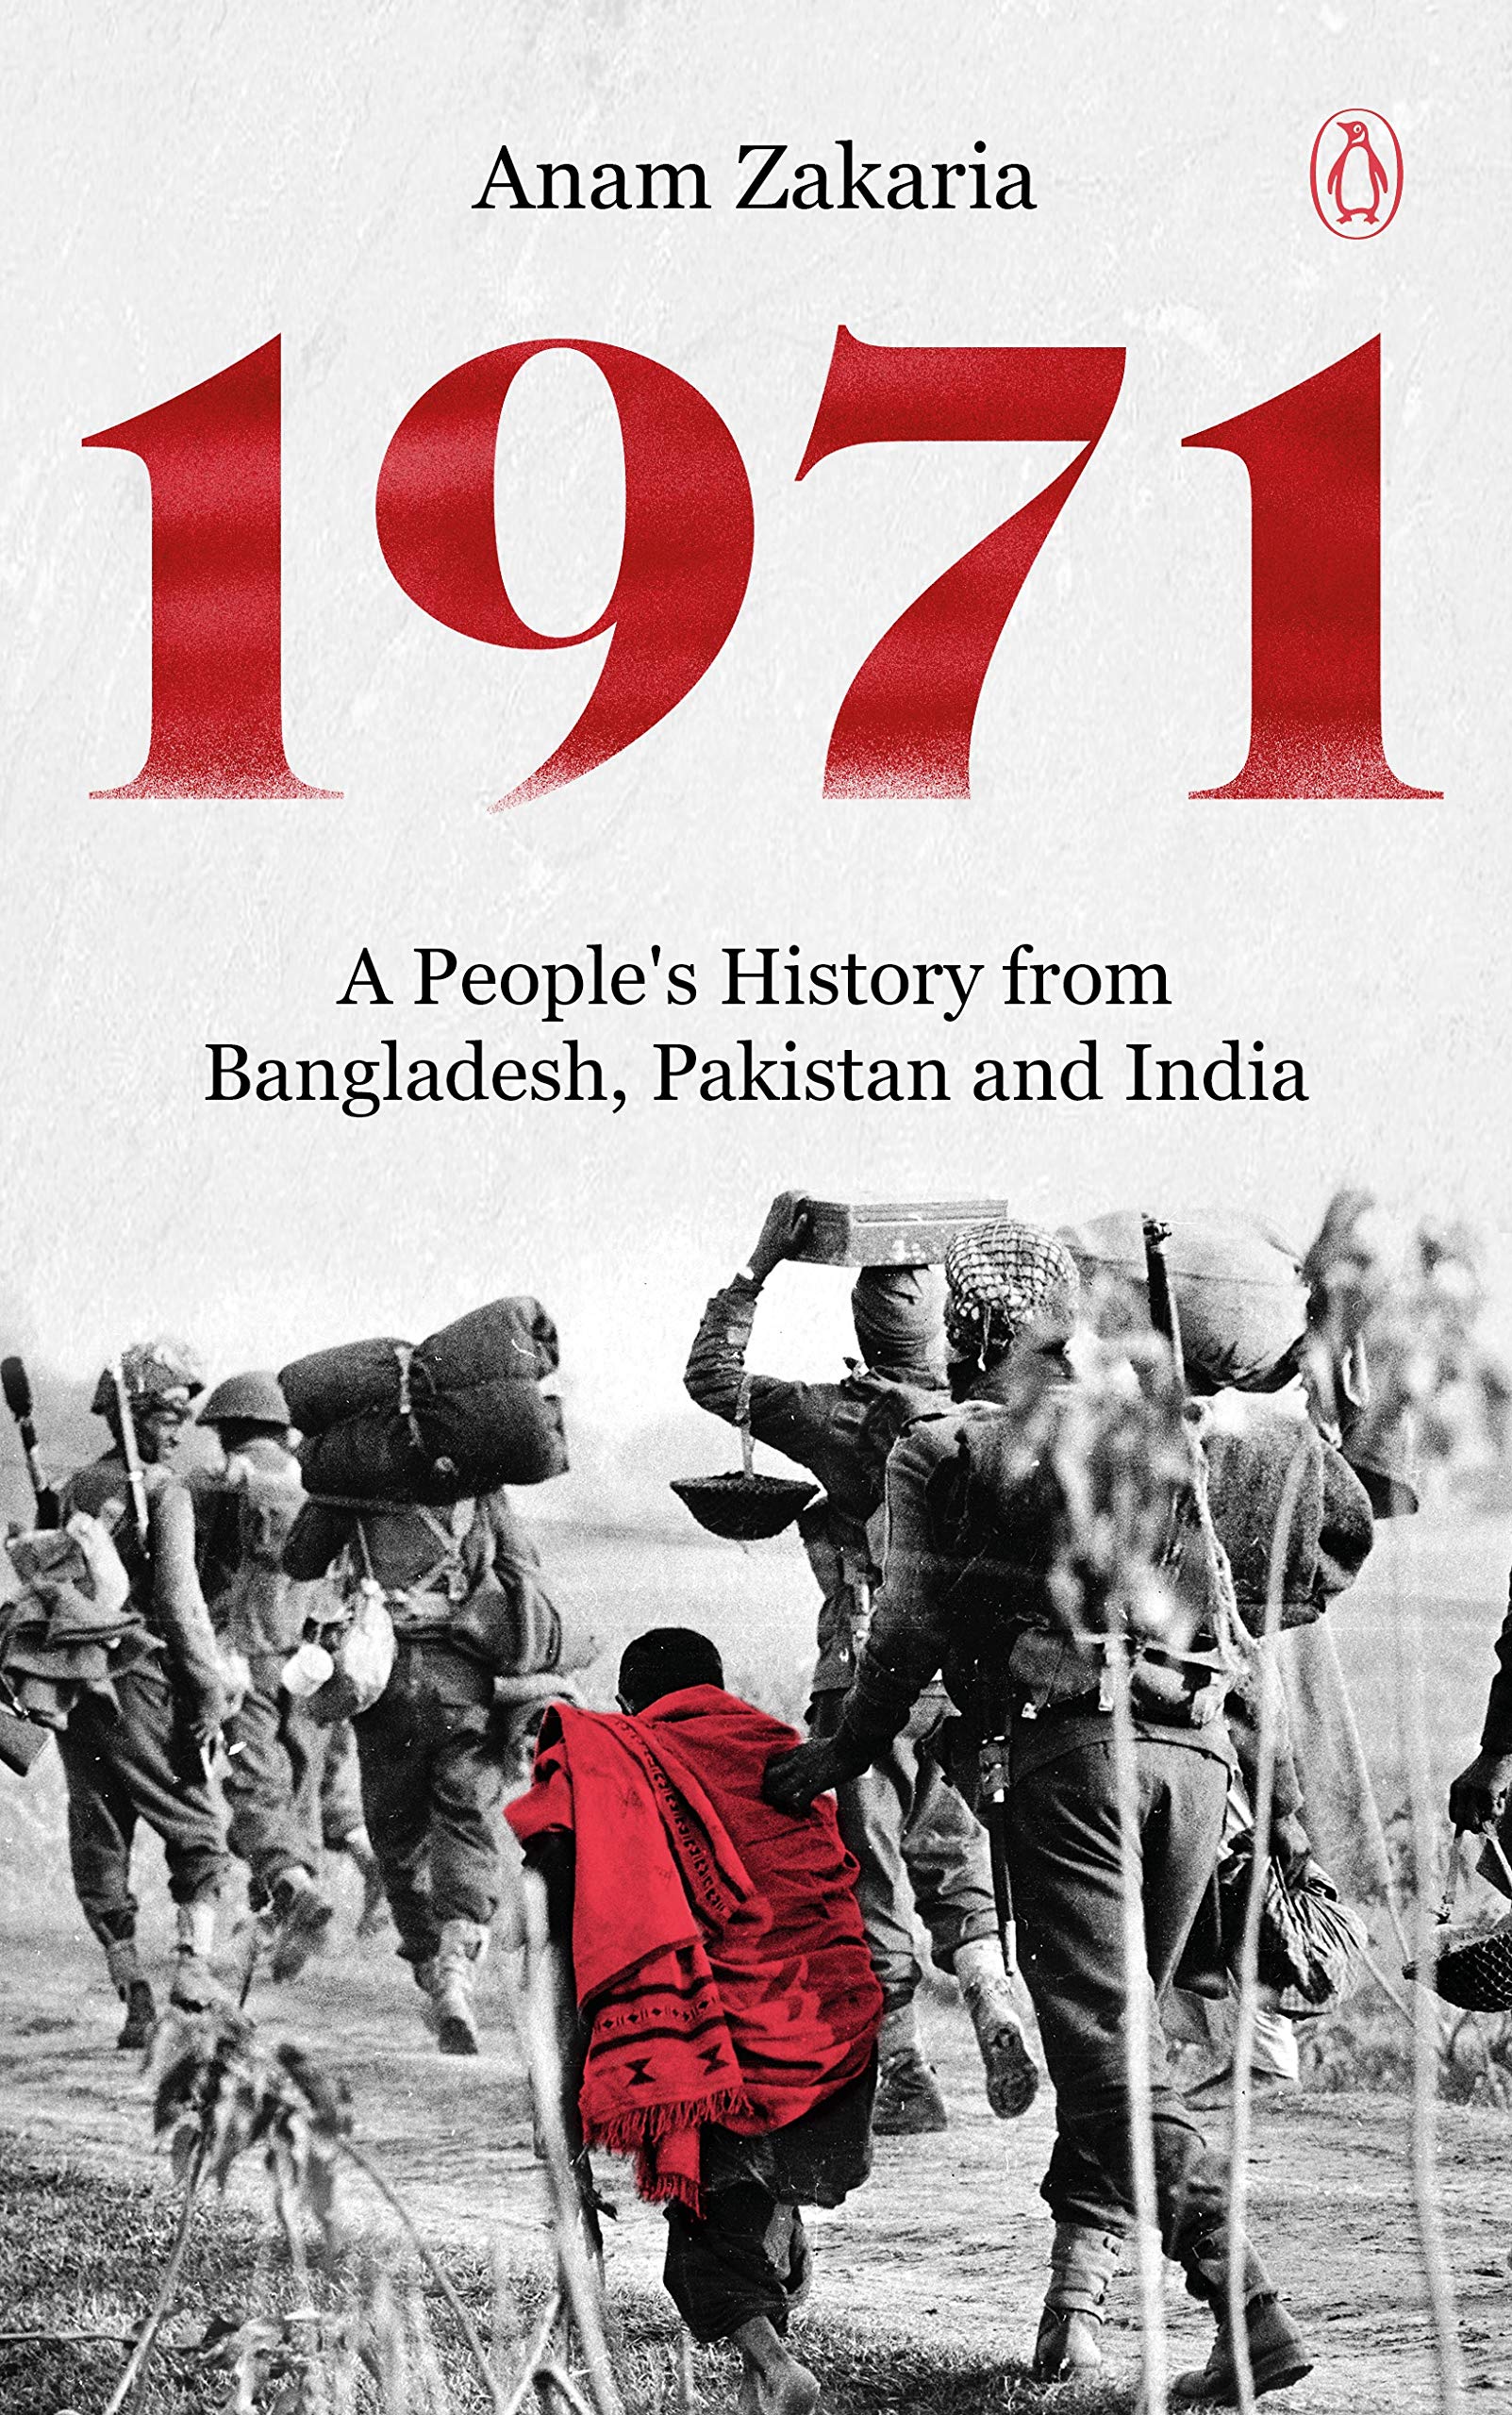 Anam Zakaria - 1971: A People's History from Bangladesh, Pakistan and India